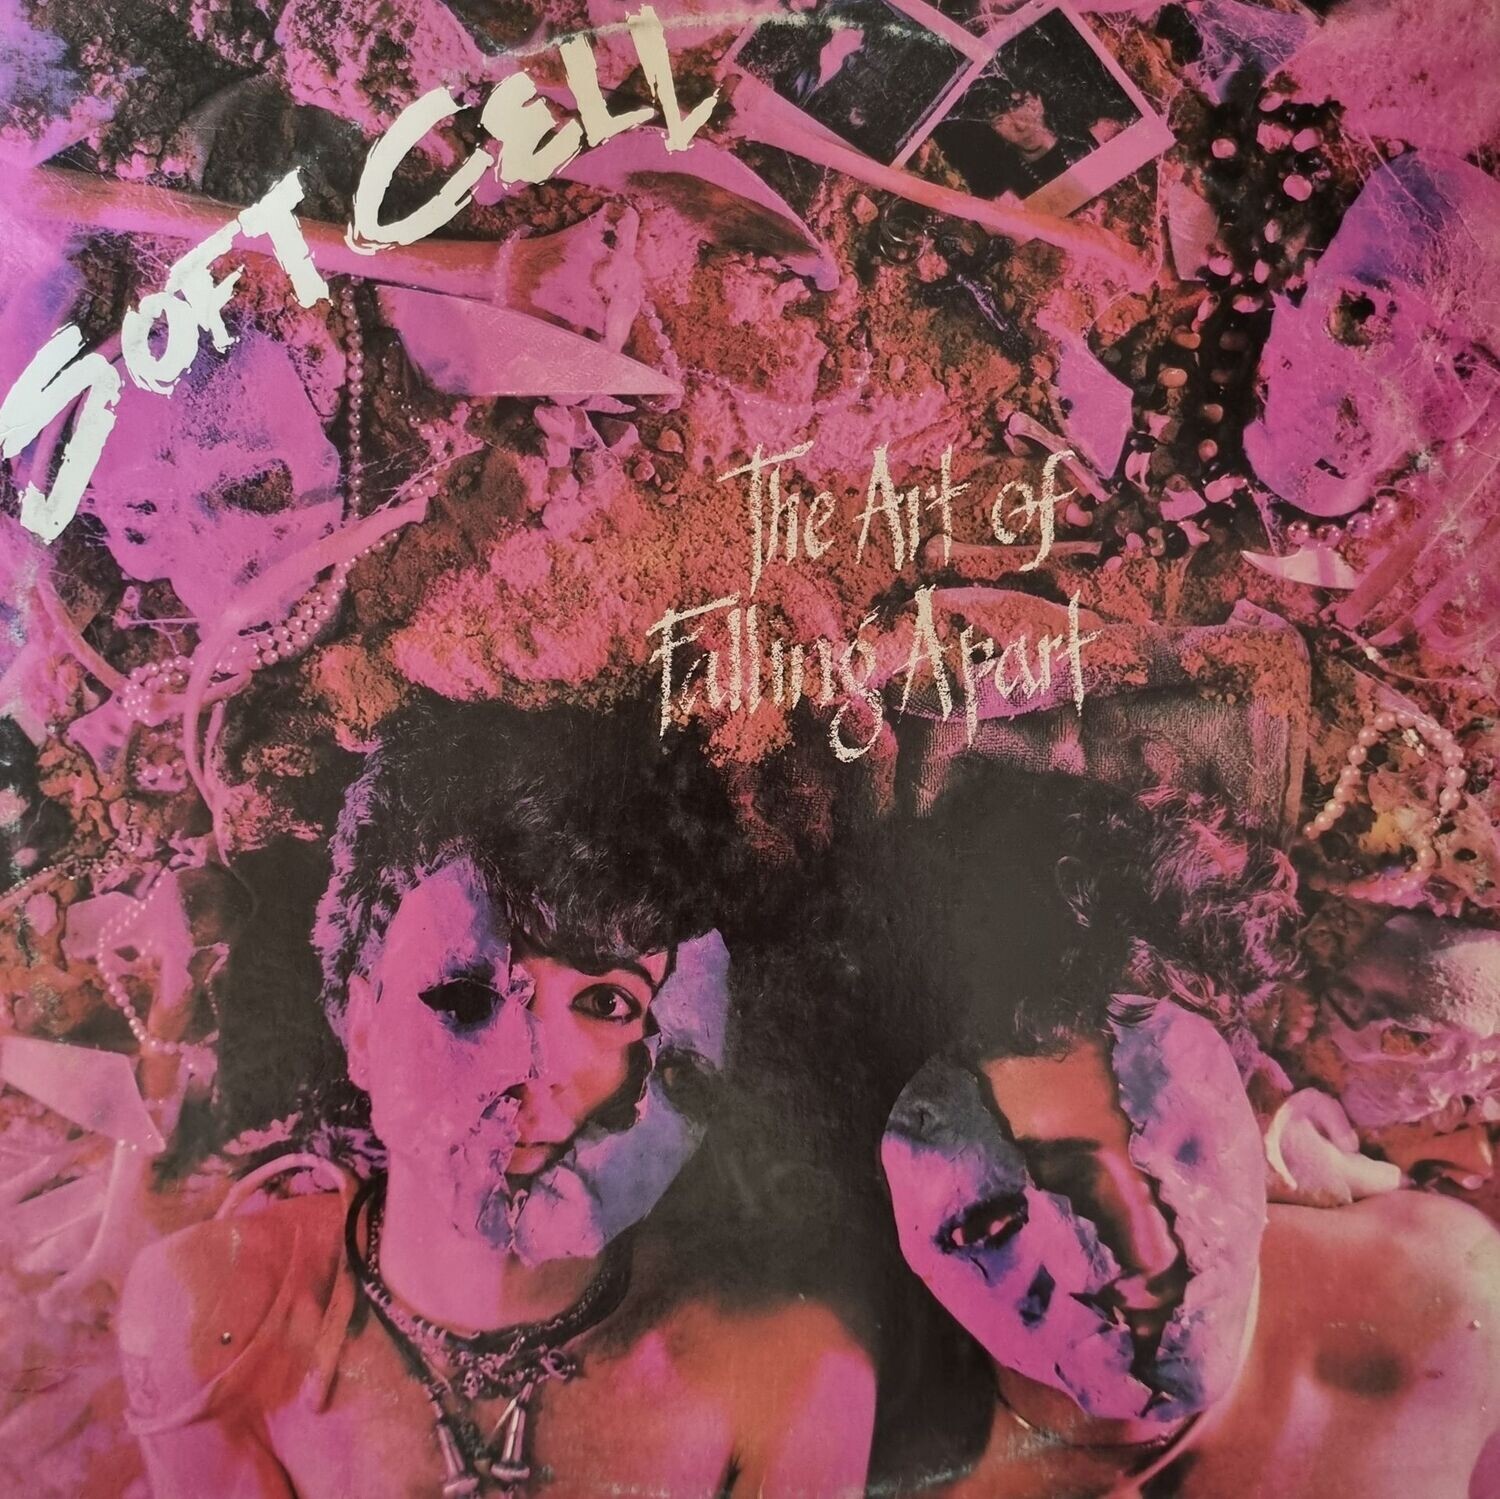 Soft Cell – The Art Of Falling Apart (1983)